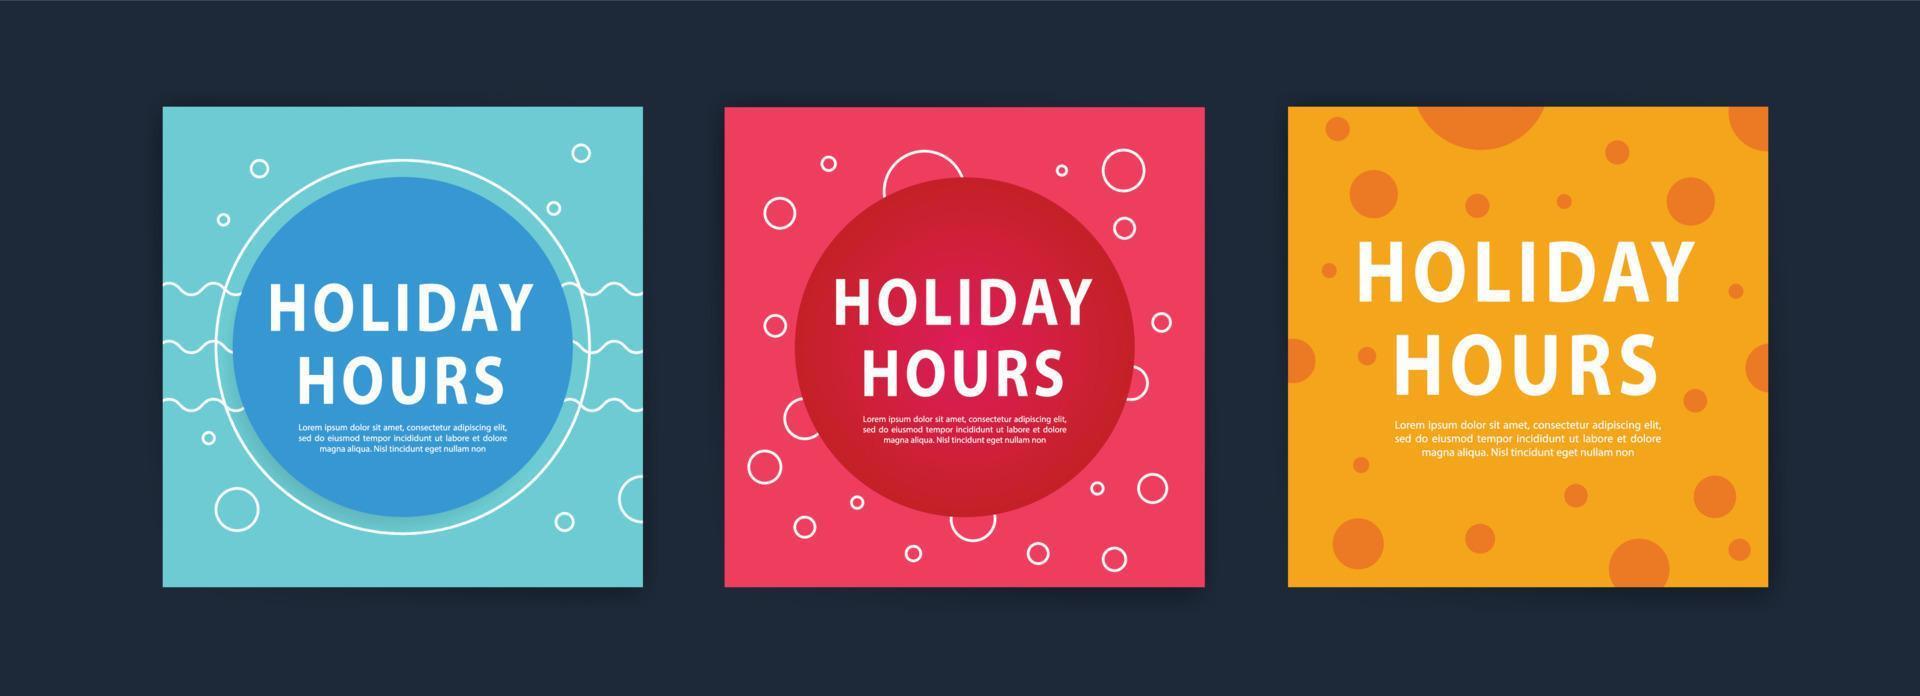 Holiday hours. banner or label for business promotion. vector